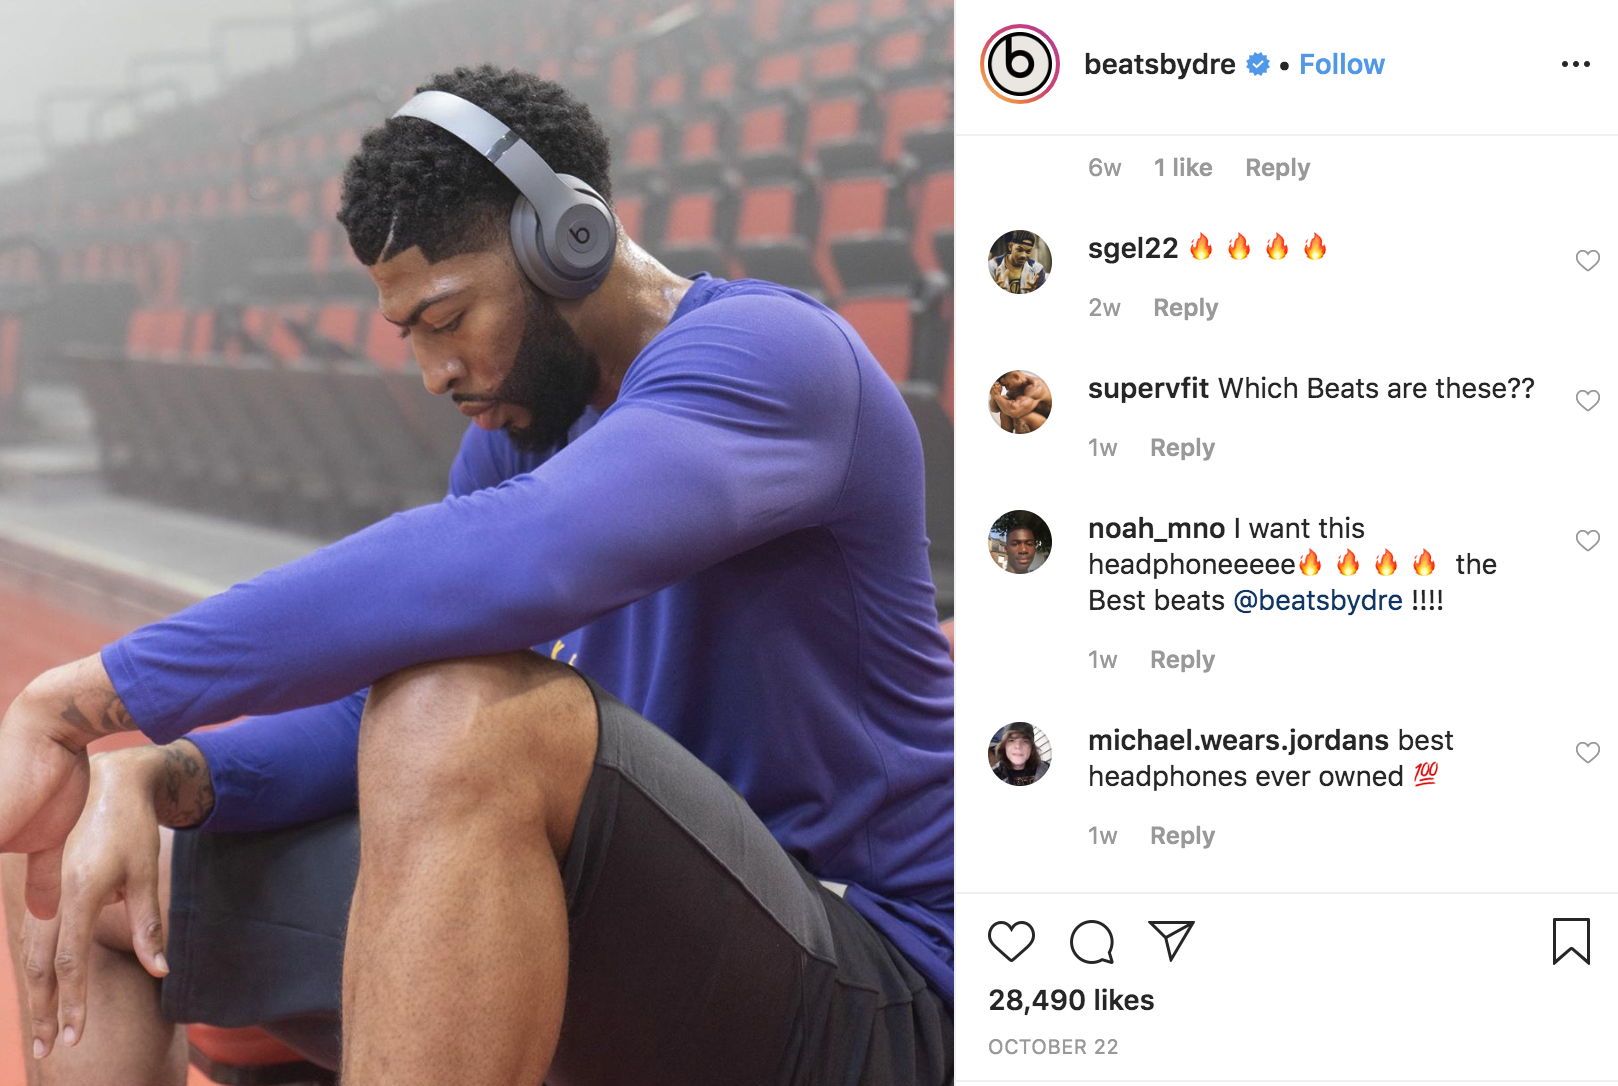 NBA player Anthony Davis sits on the sidelines of court after practice with Beats by Dre headphones on.